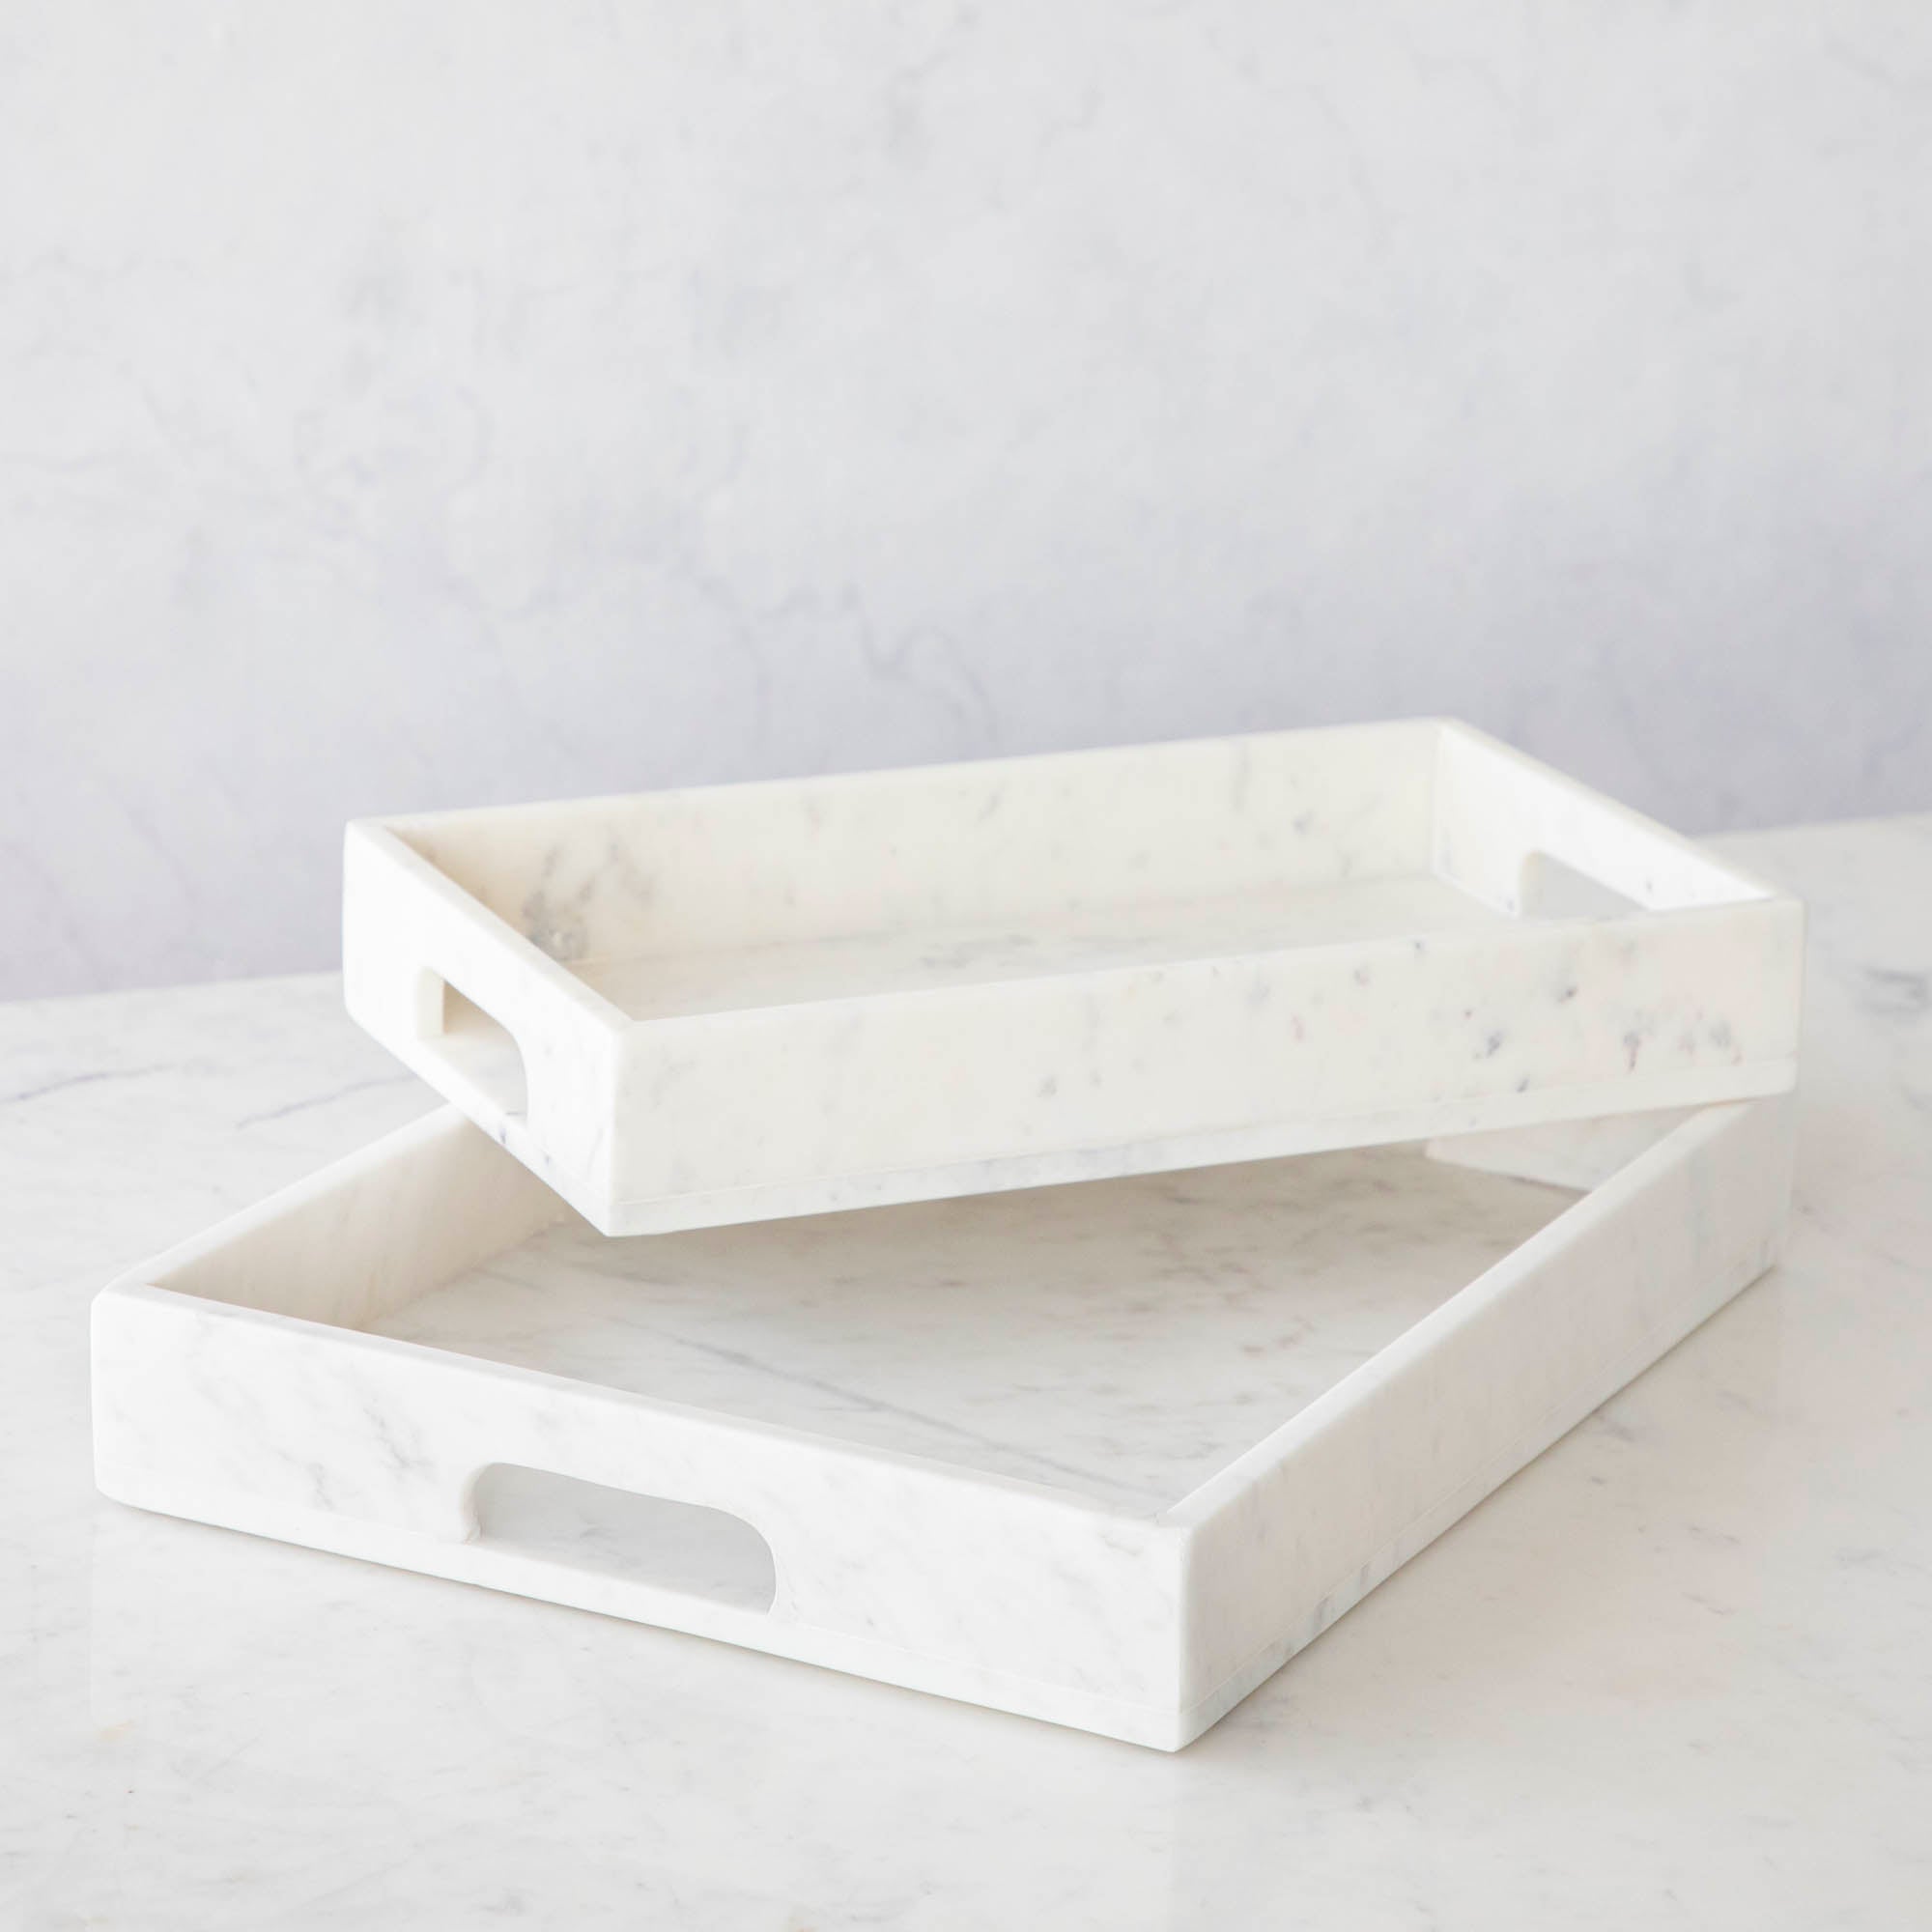 Two Godinger White Marble Rectangular Trays on a striped surface, one holding art supplies and the other candles and a small jar, showcasing the elegance of marble.